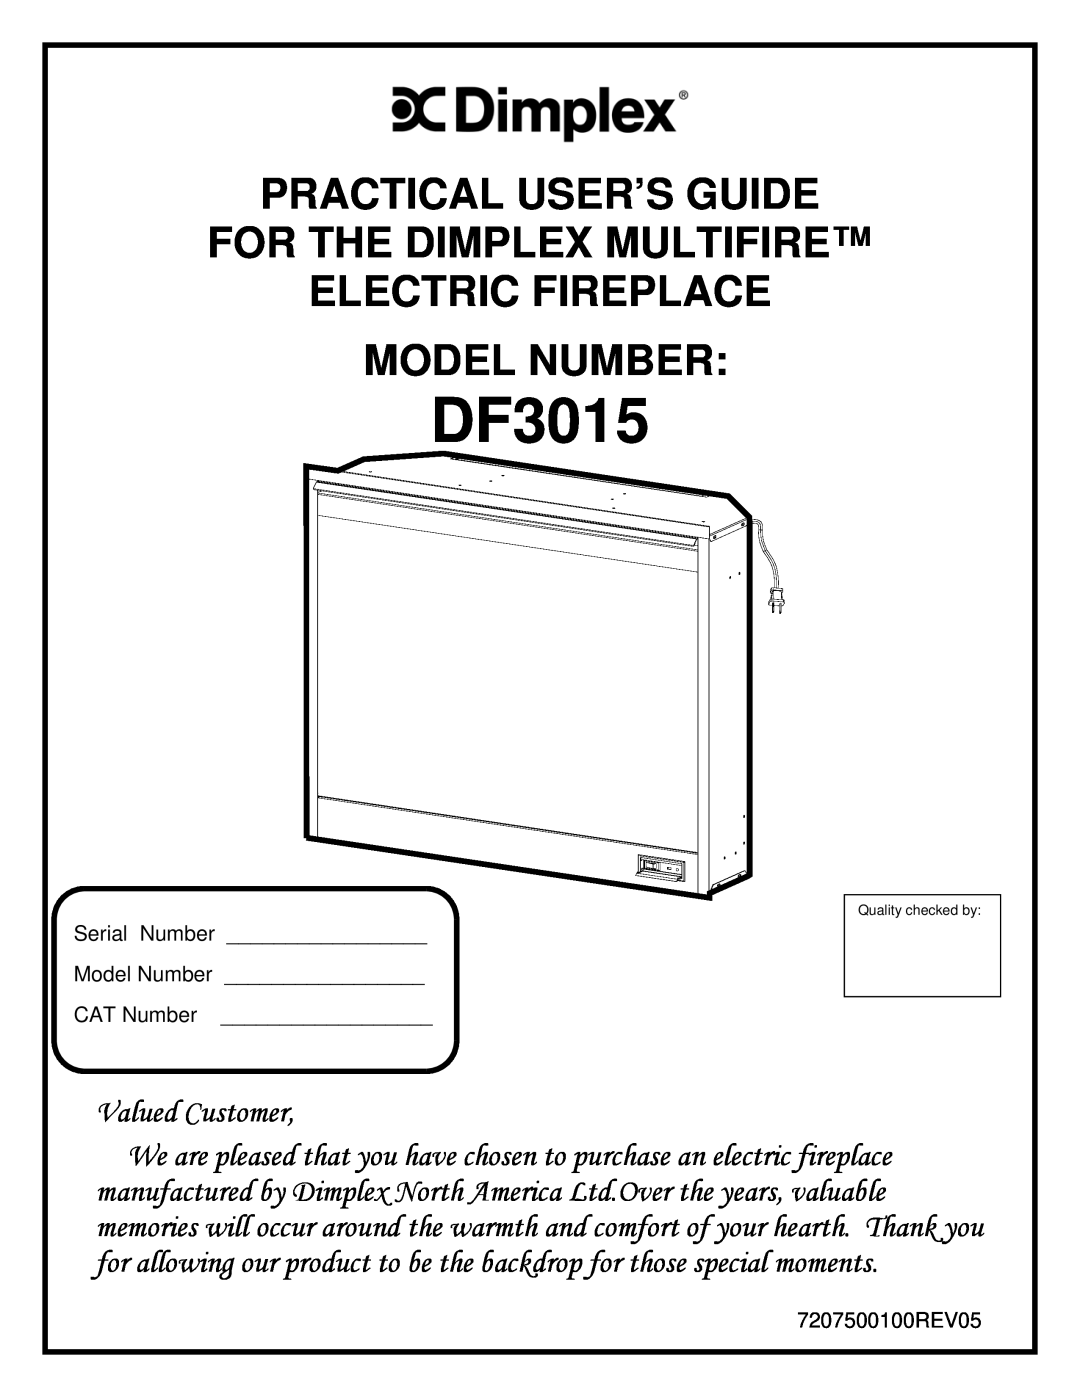 Dimplex DF3015 manual Practical User’S Guide For The Dimplex Multifire, Electric Fireplace Model Number 